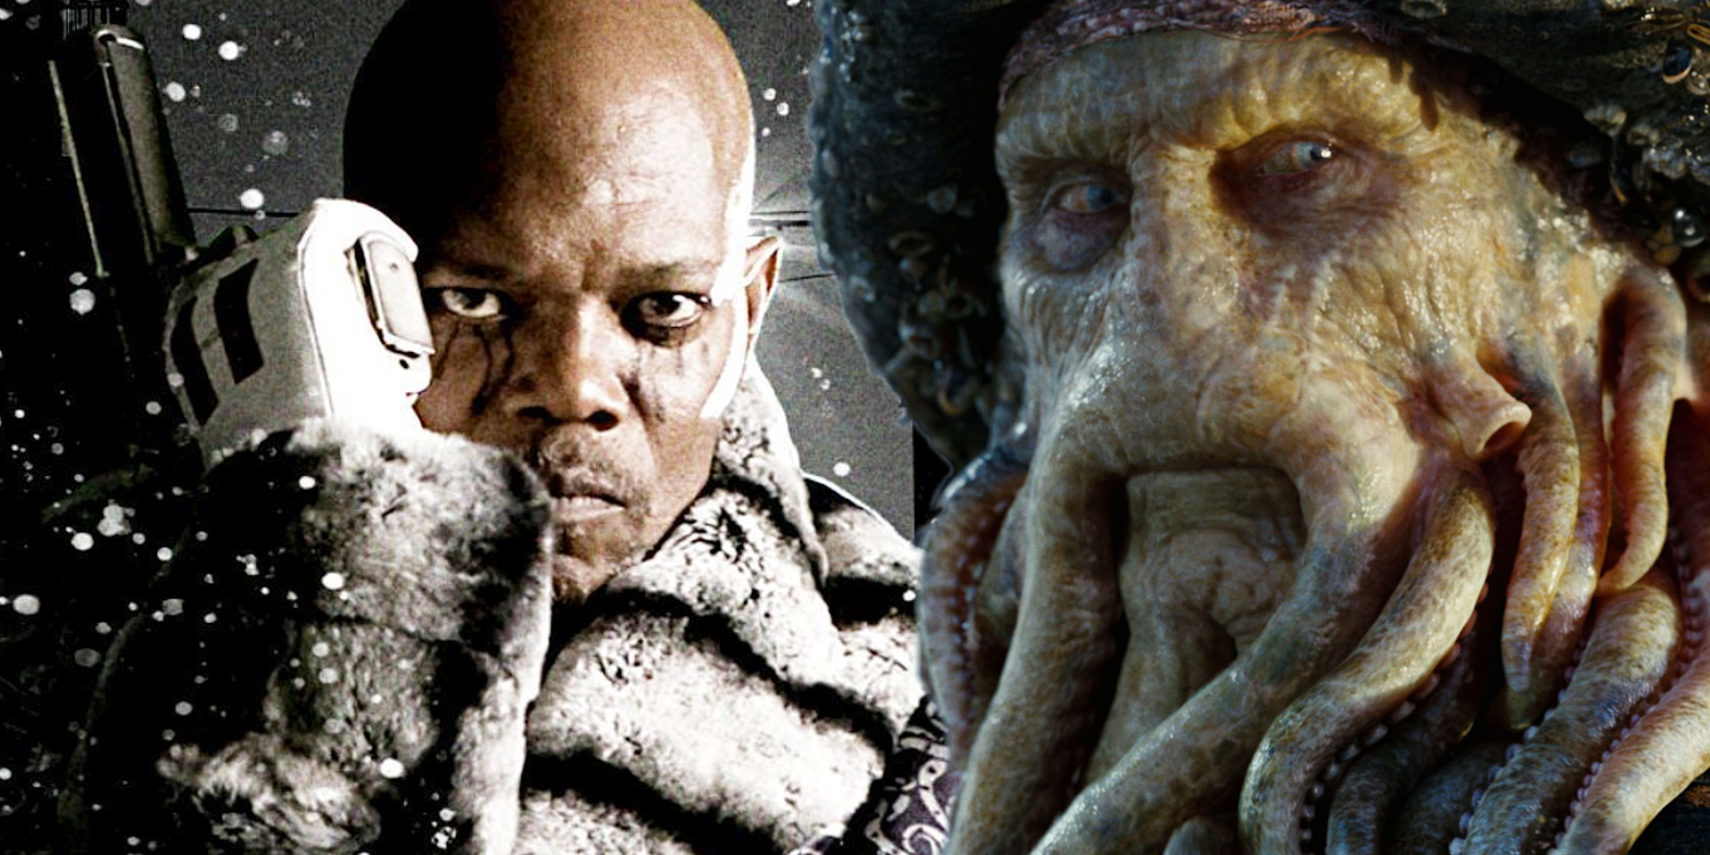 The Octopus and Davy Jones pose menacingly in their movies